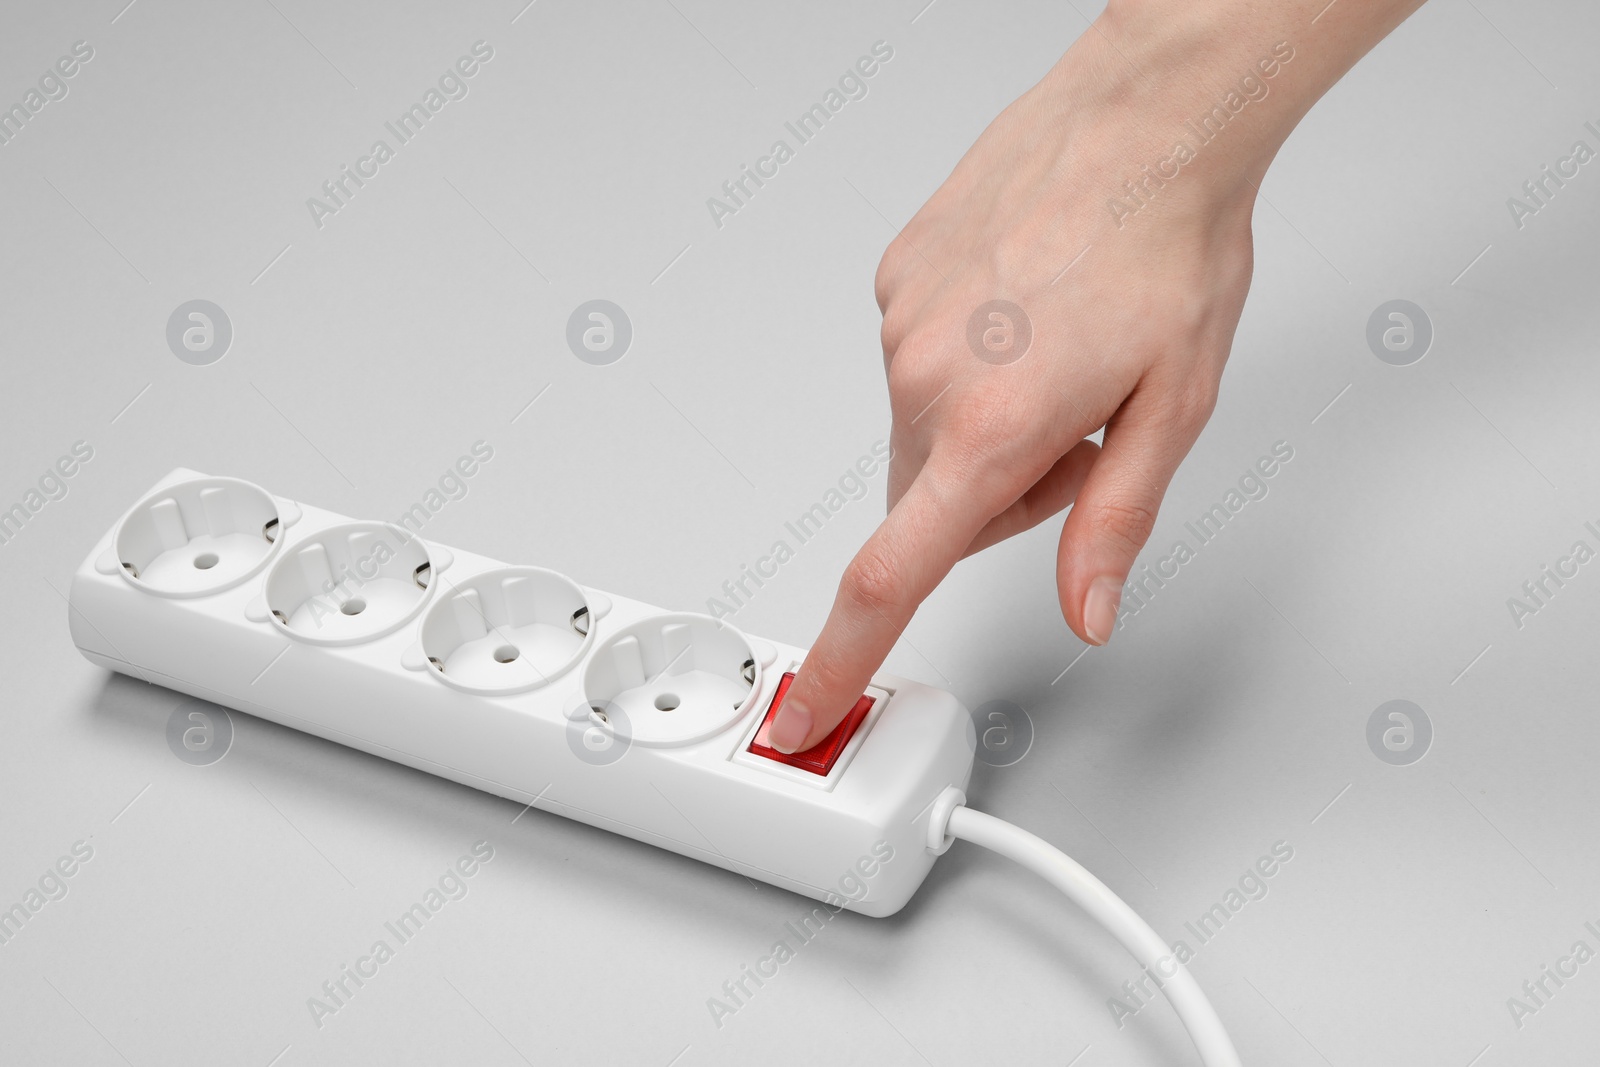 Photo of Woman pressing switch button of power strip on white background, closeup